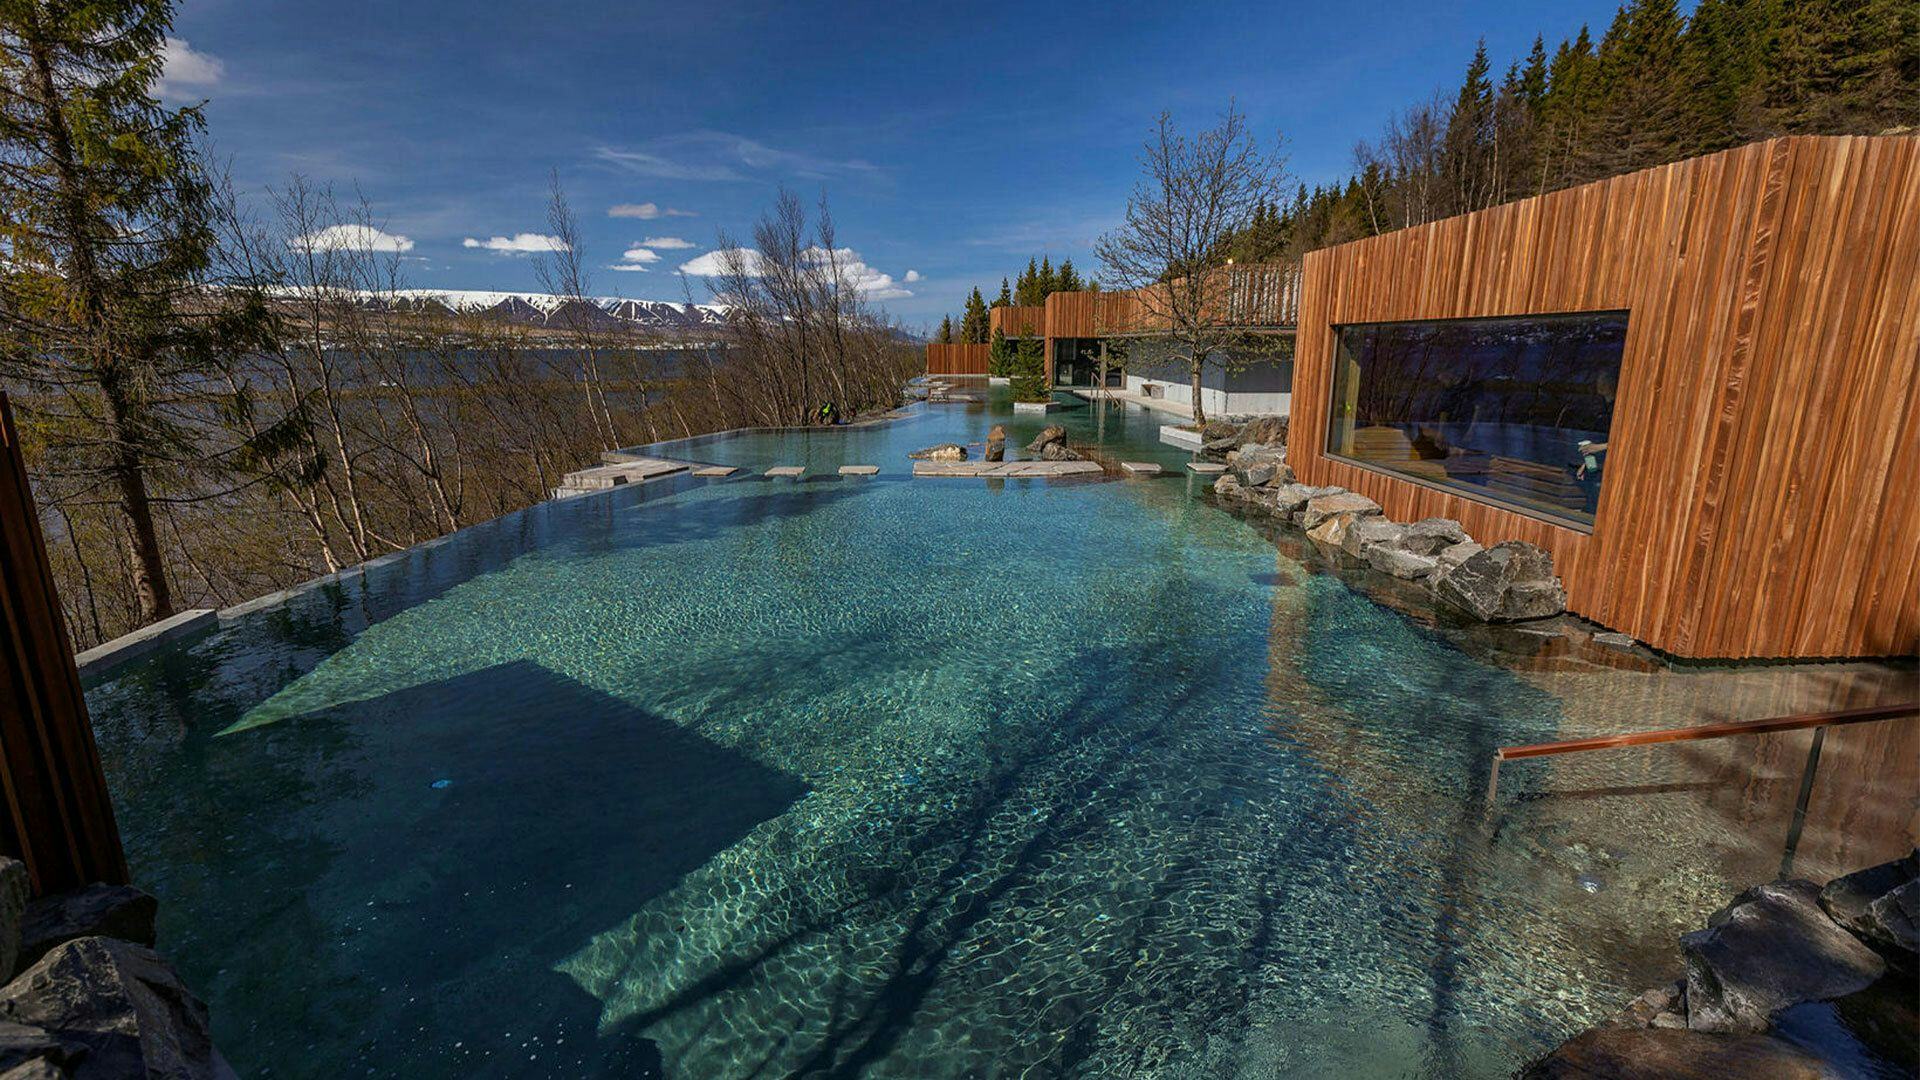 An outdoor thermal pool with clear blue water, surrounded by wooden structures and nature